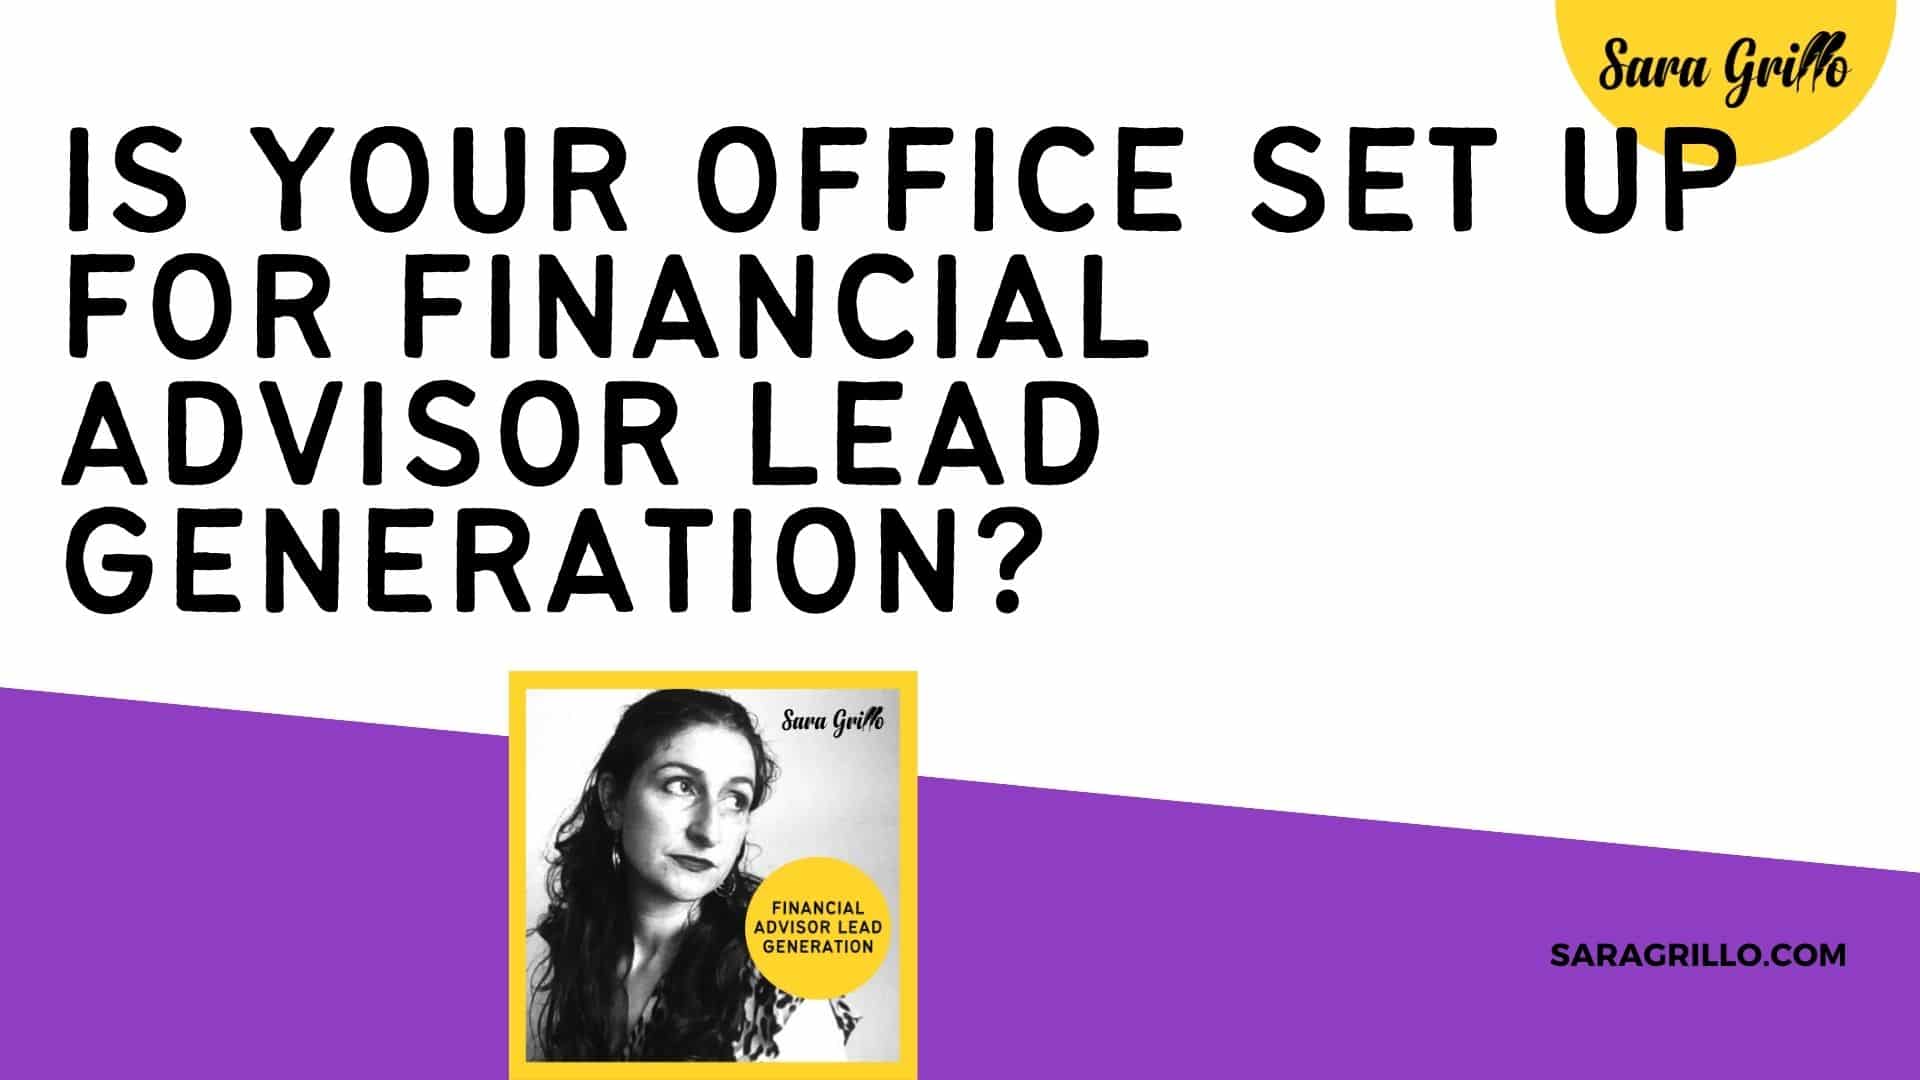 Is your office set up for financial advisor lead generation? Read this blog to find out.